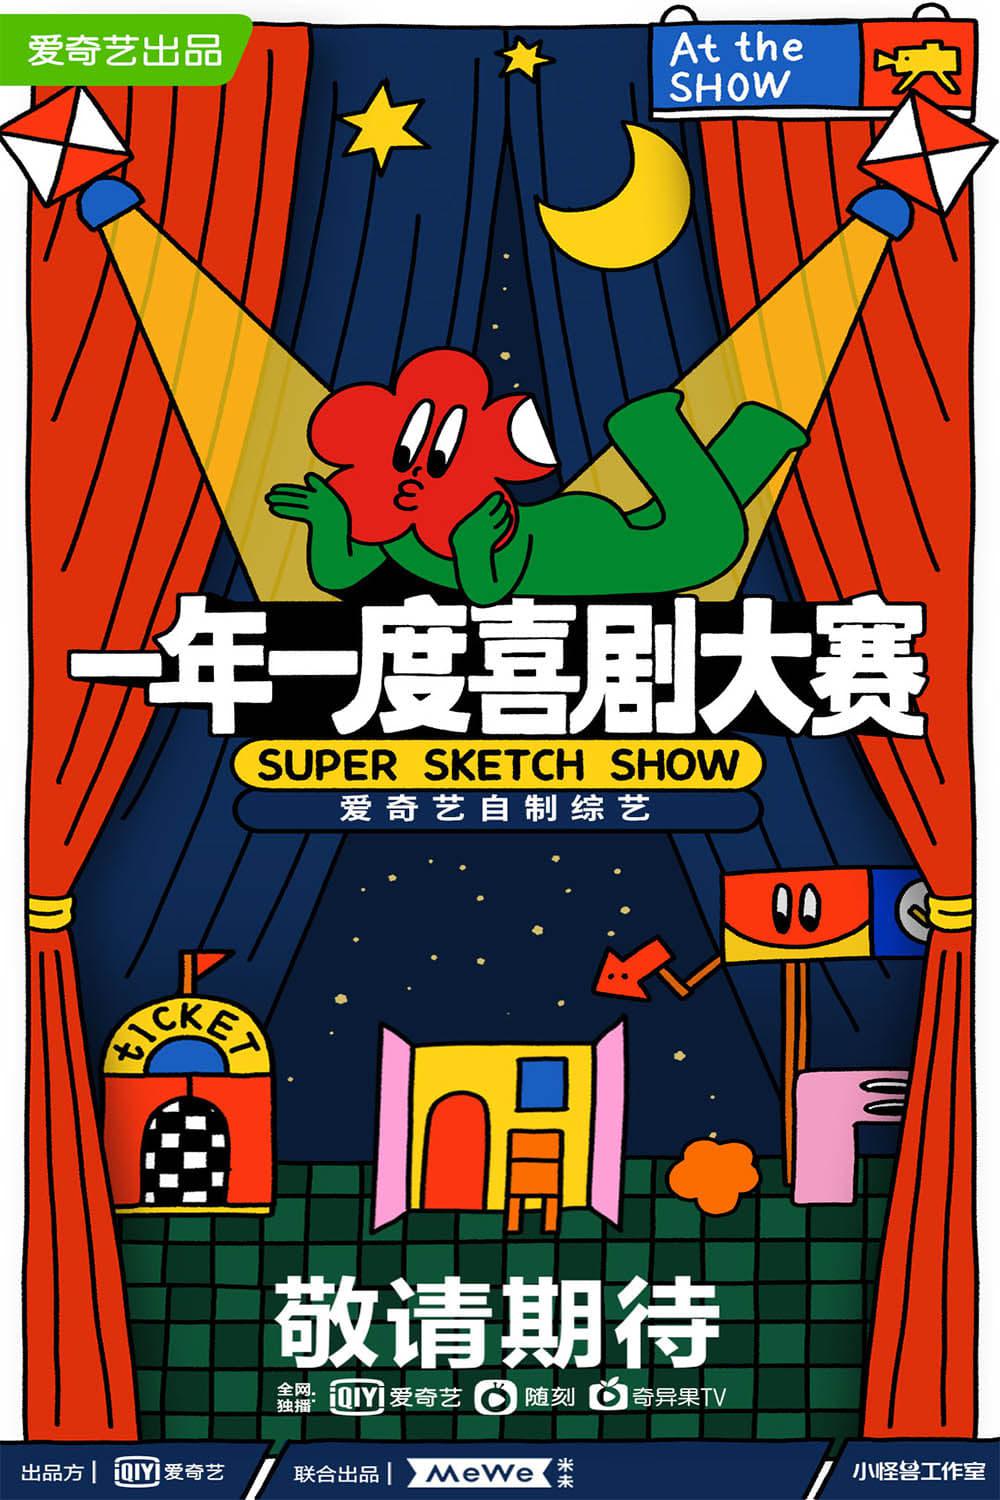 TV ratings for Super Sketch Show (一年一度喜剧大赛) in Tailandia. iqiyi TV series